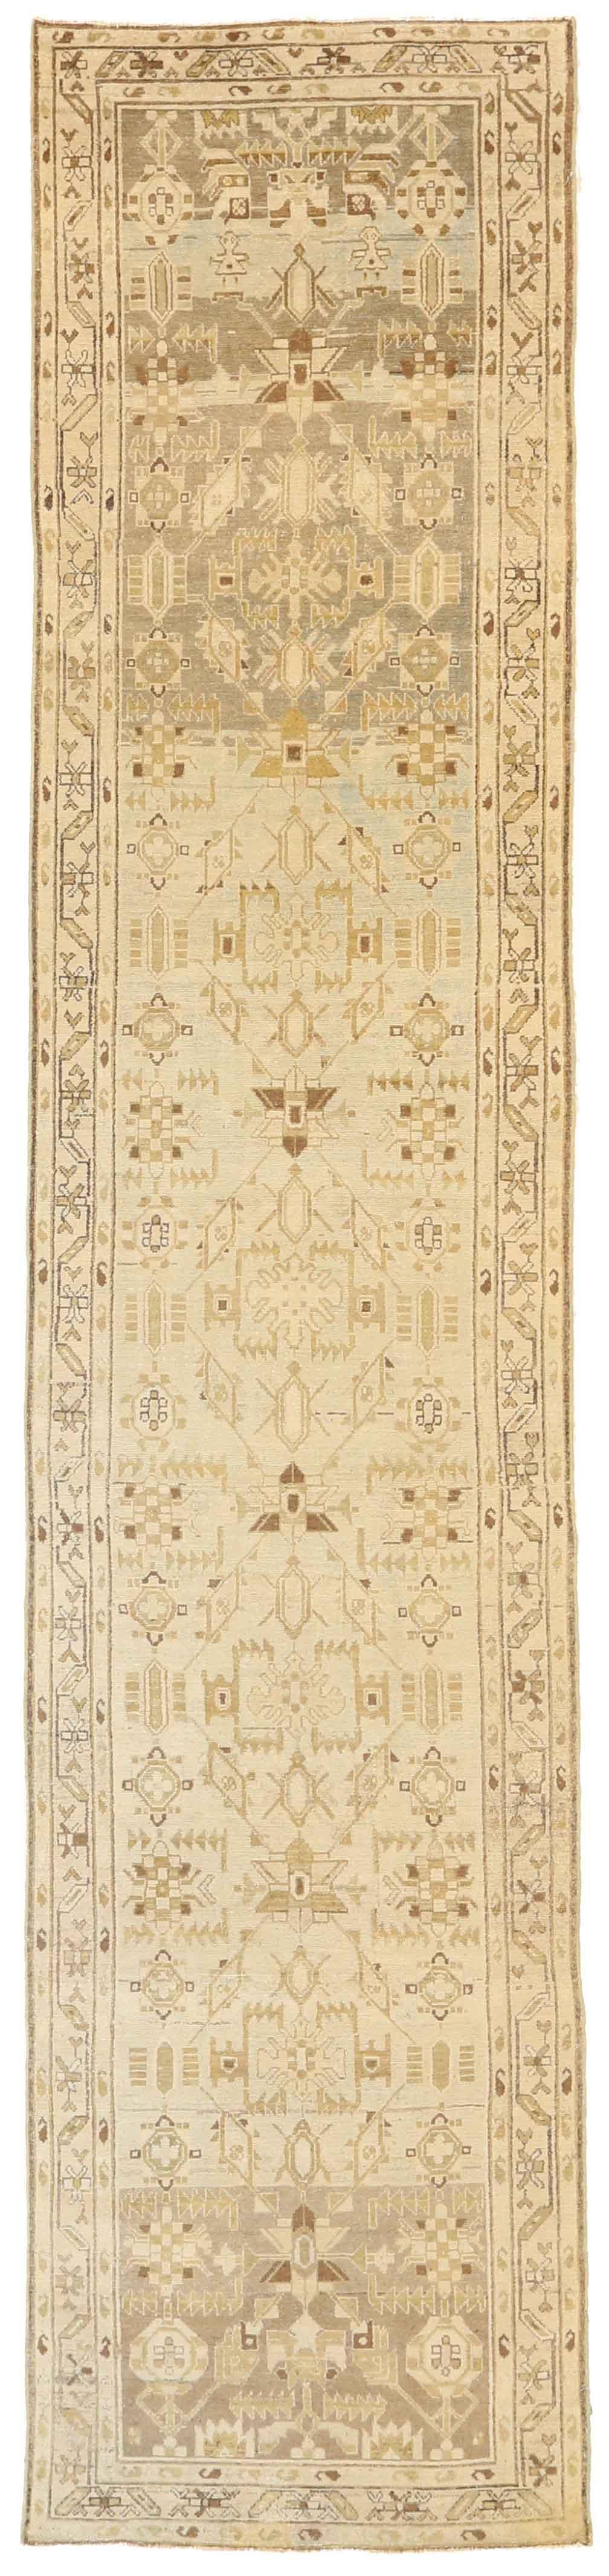 Wool Antique Persian Rug Malayer Style with Delightful Scarab Details, circa 1940s For Sale